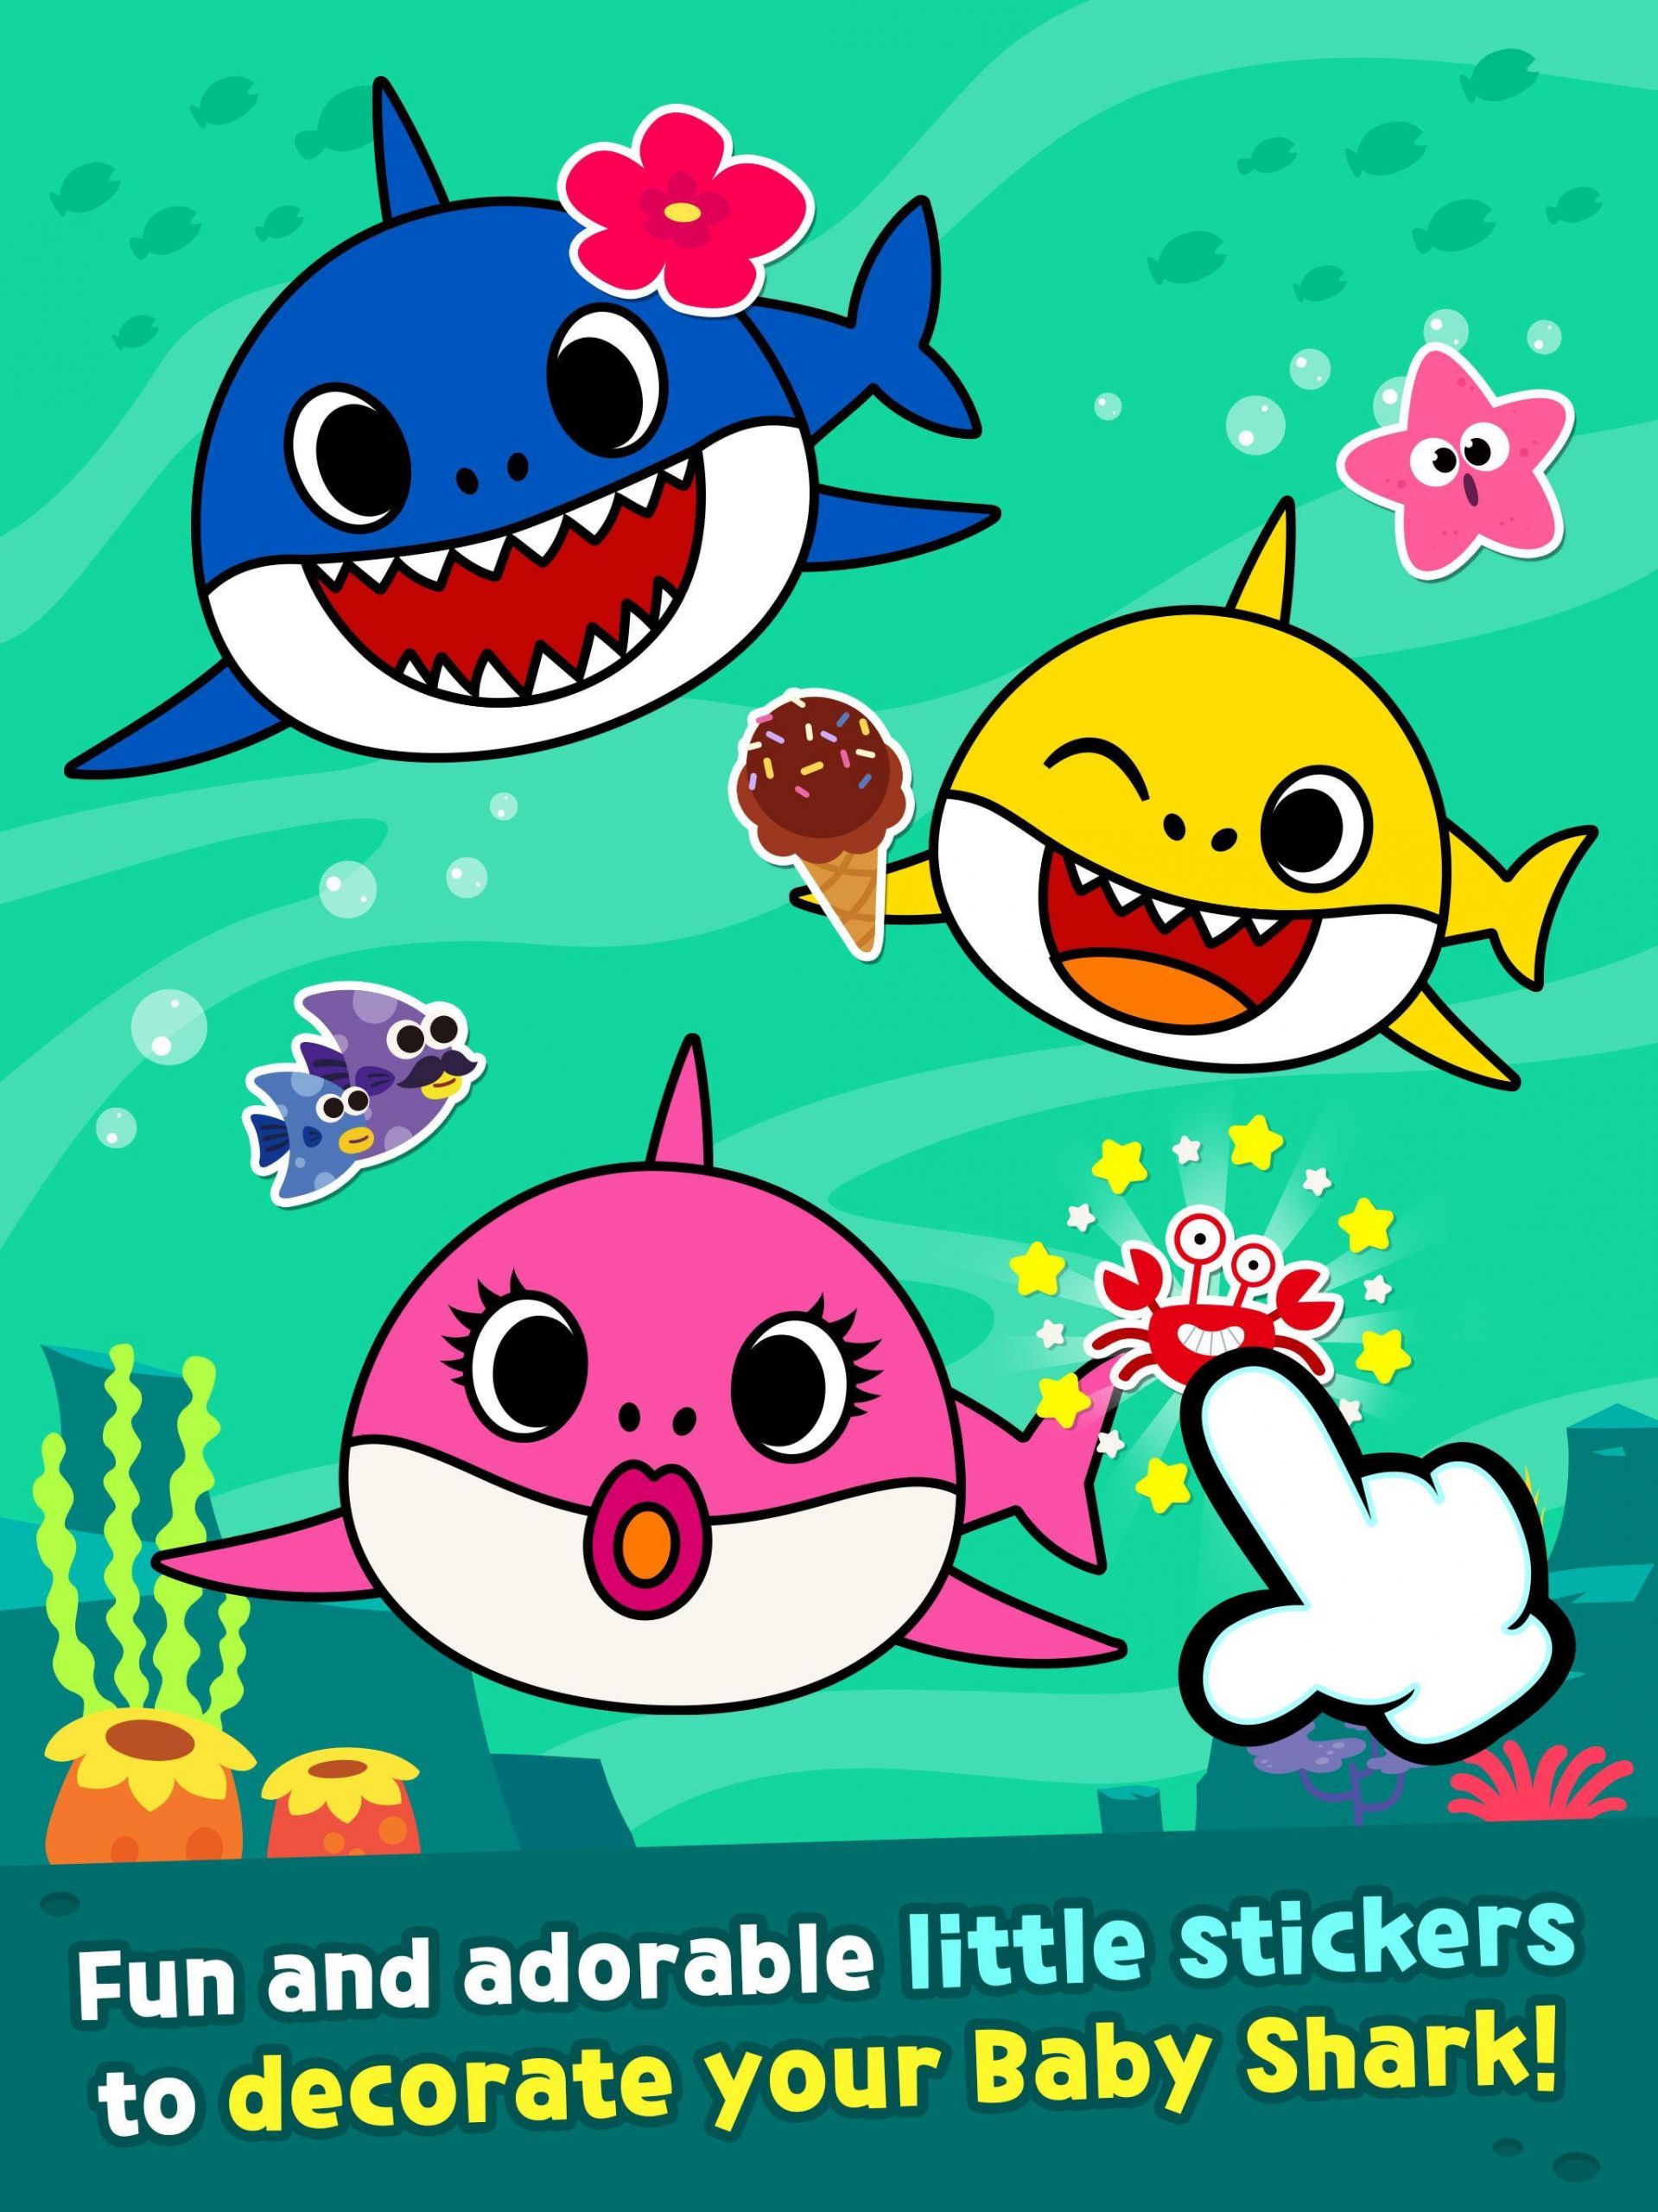 Baby Shark Coloring Book
 Pinkfong Baby Shark Coloring Book for Android APK Download